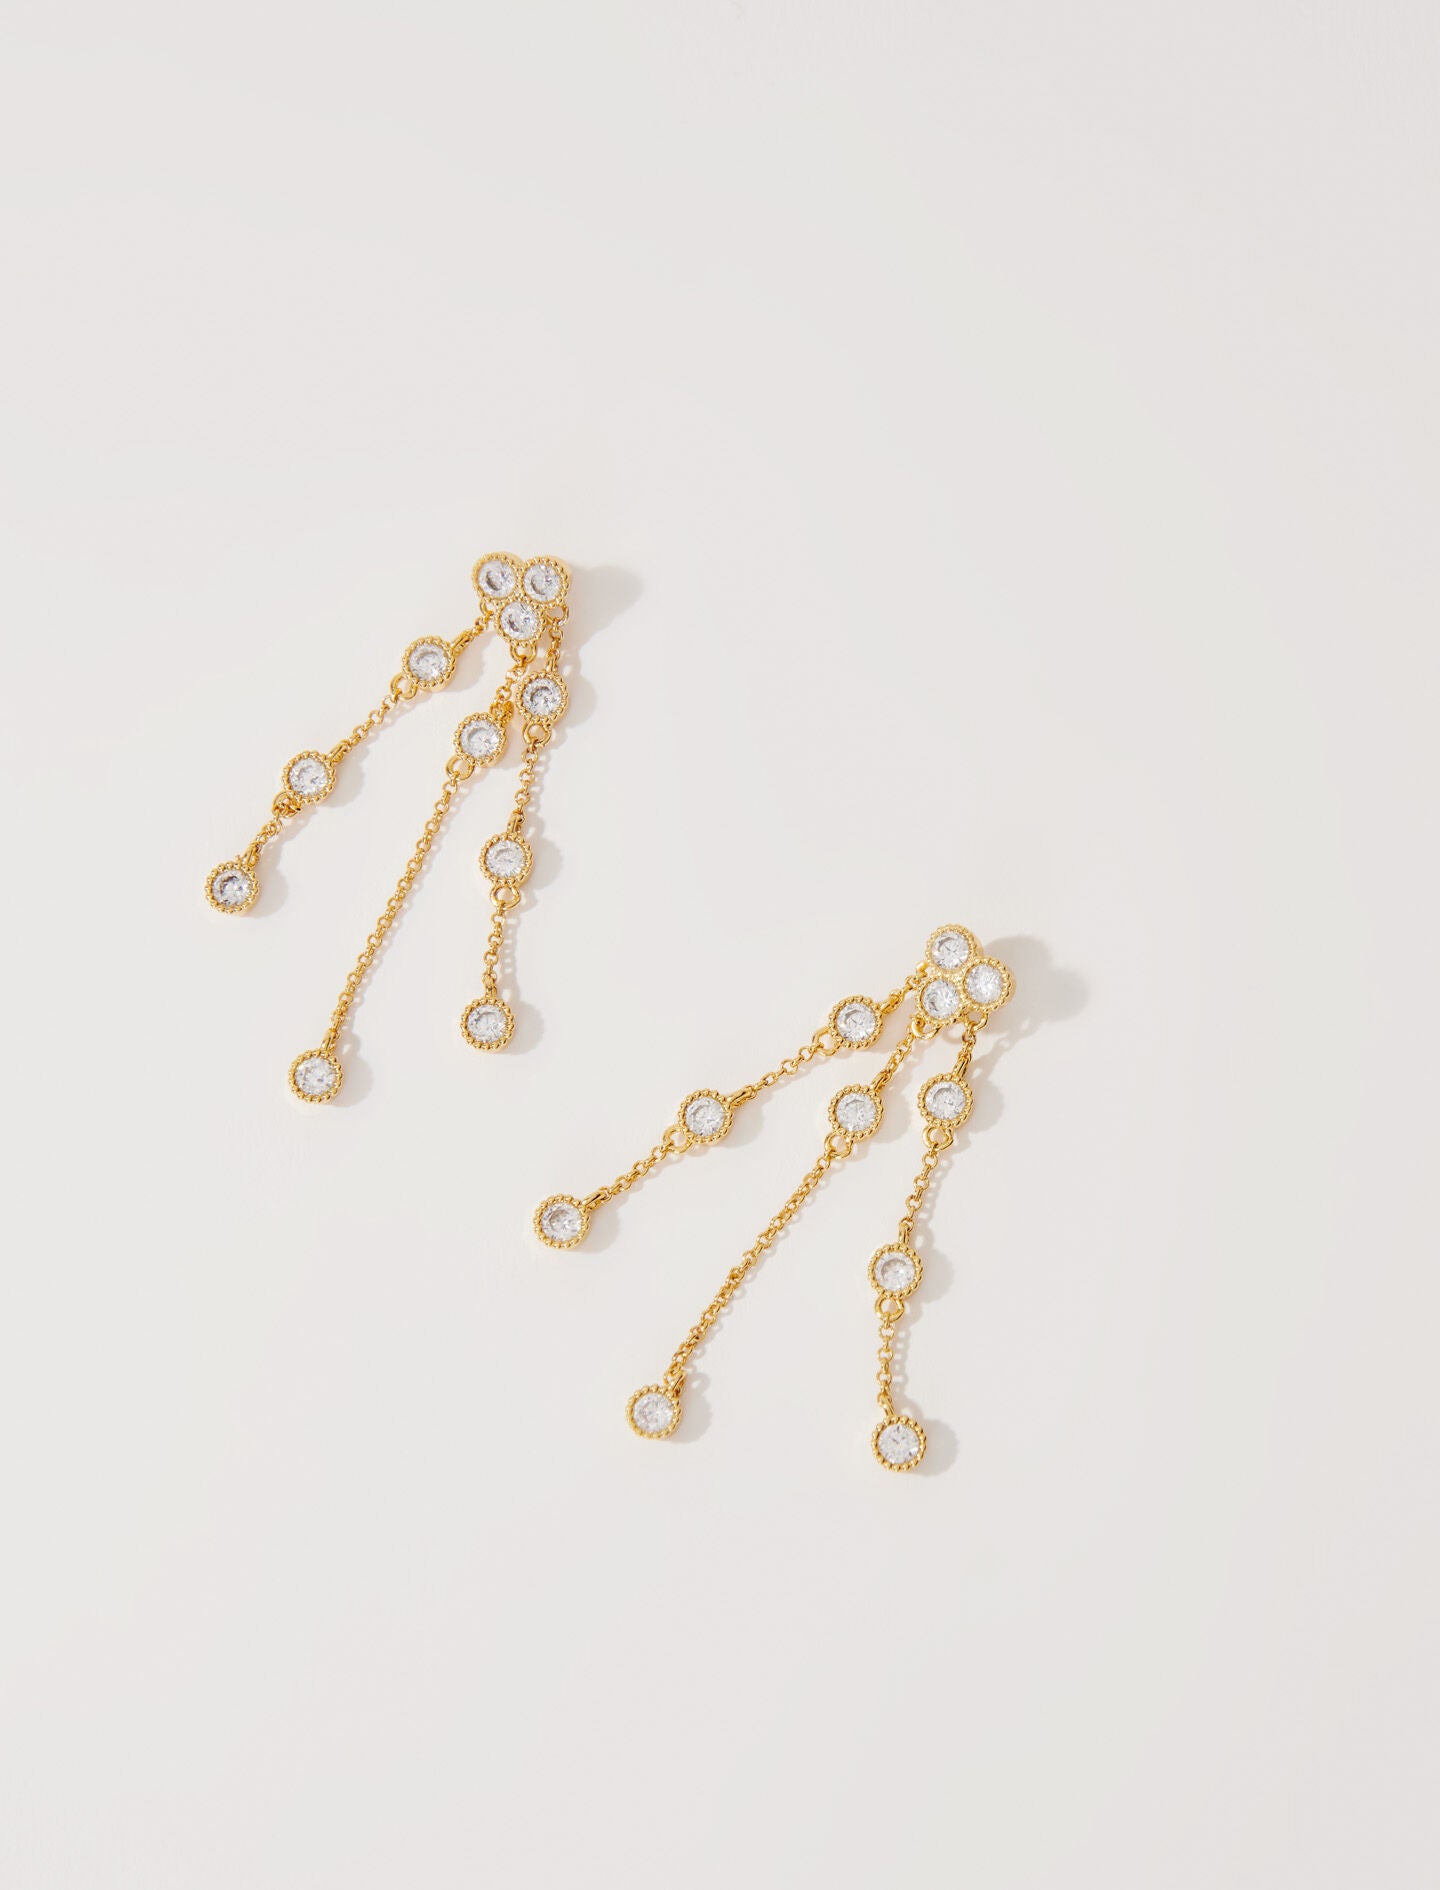 Gold-gold-plated recycled brass earrings